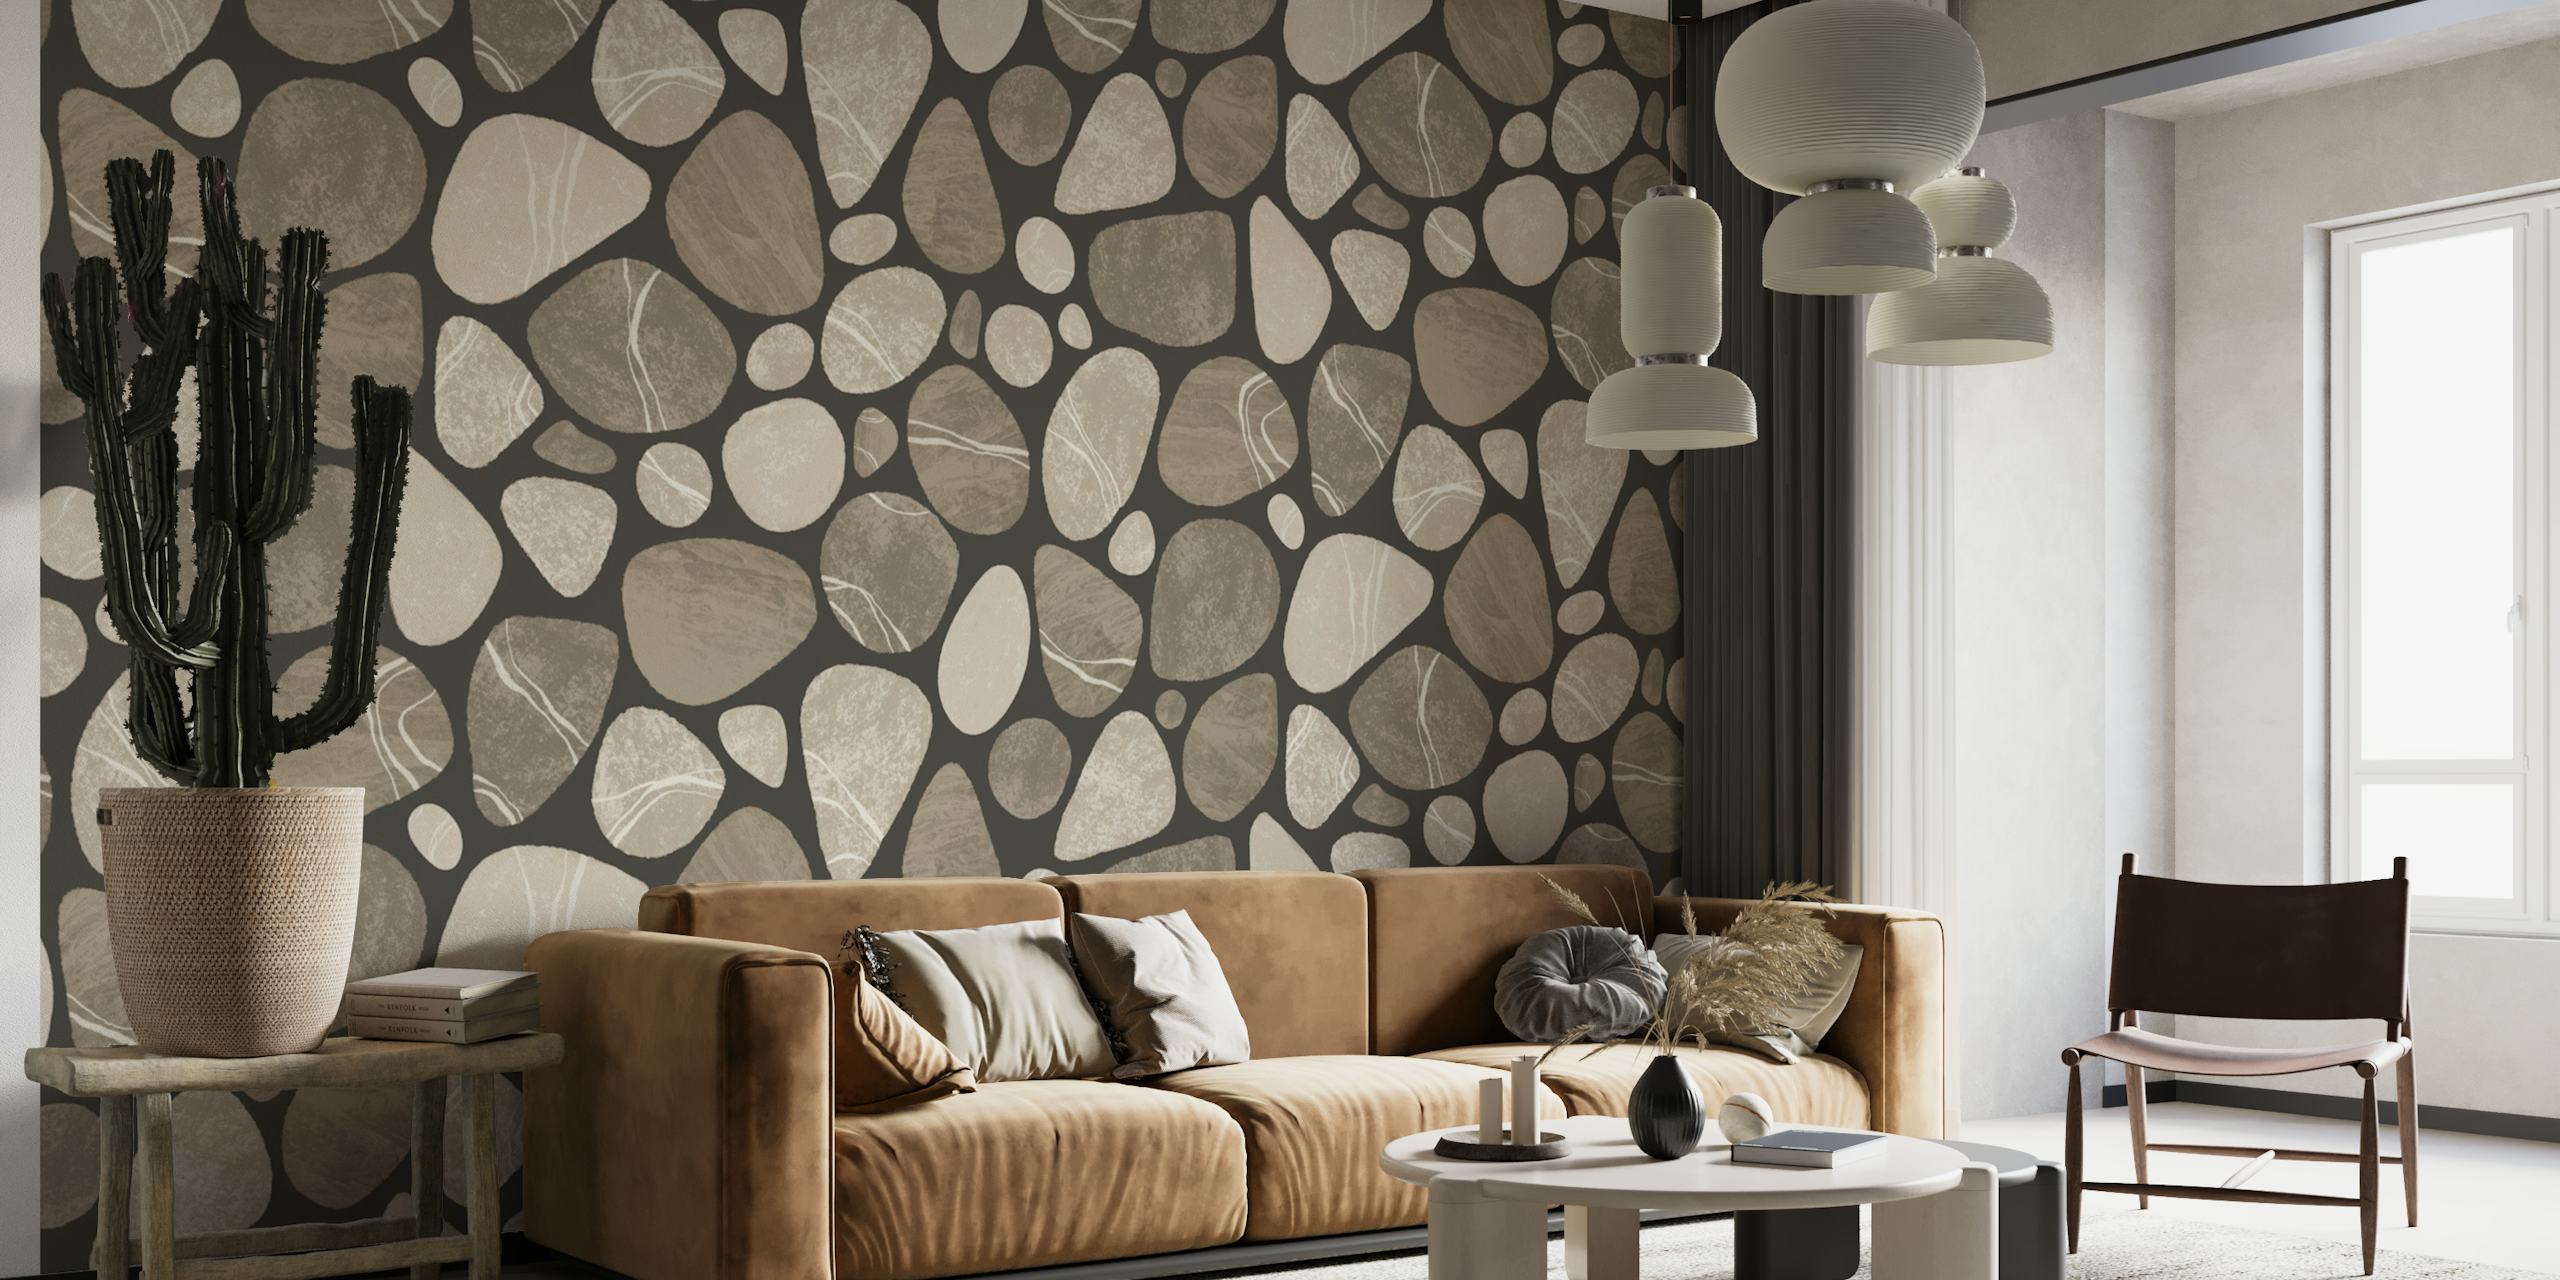 Pebble Serenity Stone Pattern Beauty Of Nature In Neutral Brown Beige Colors wallpaper